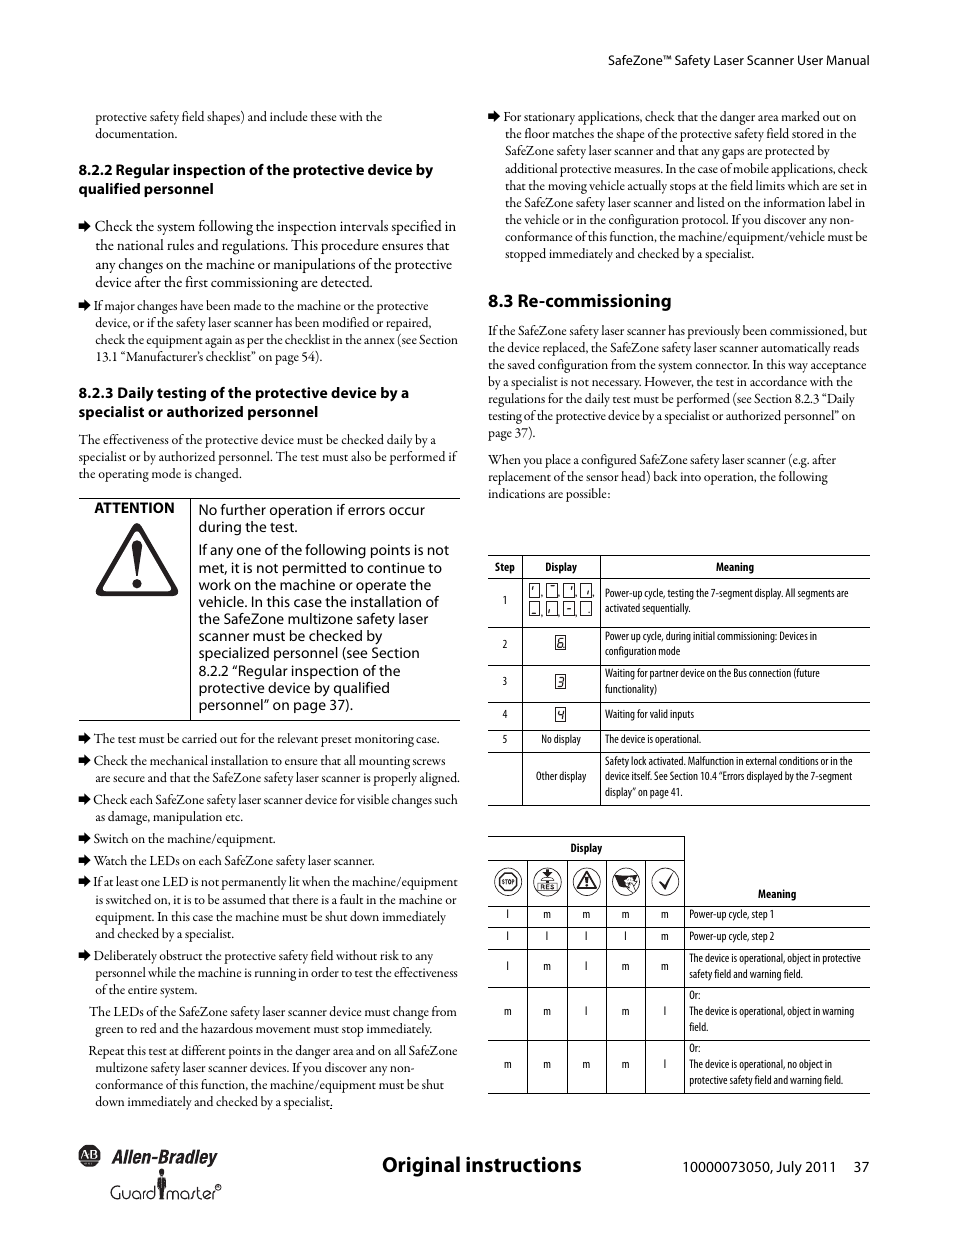 Original instructions, 3 re-commissioning | Rockwell Automation 442L SafeZone Singlezone & Multizone Safety Laser Scanner User Manual | Page 39 / 60